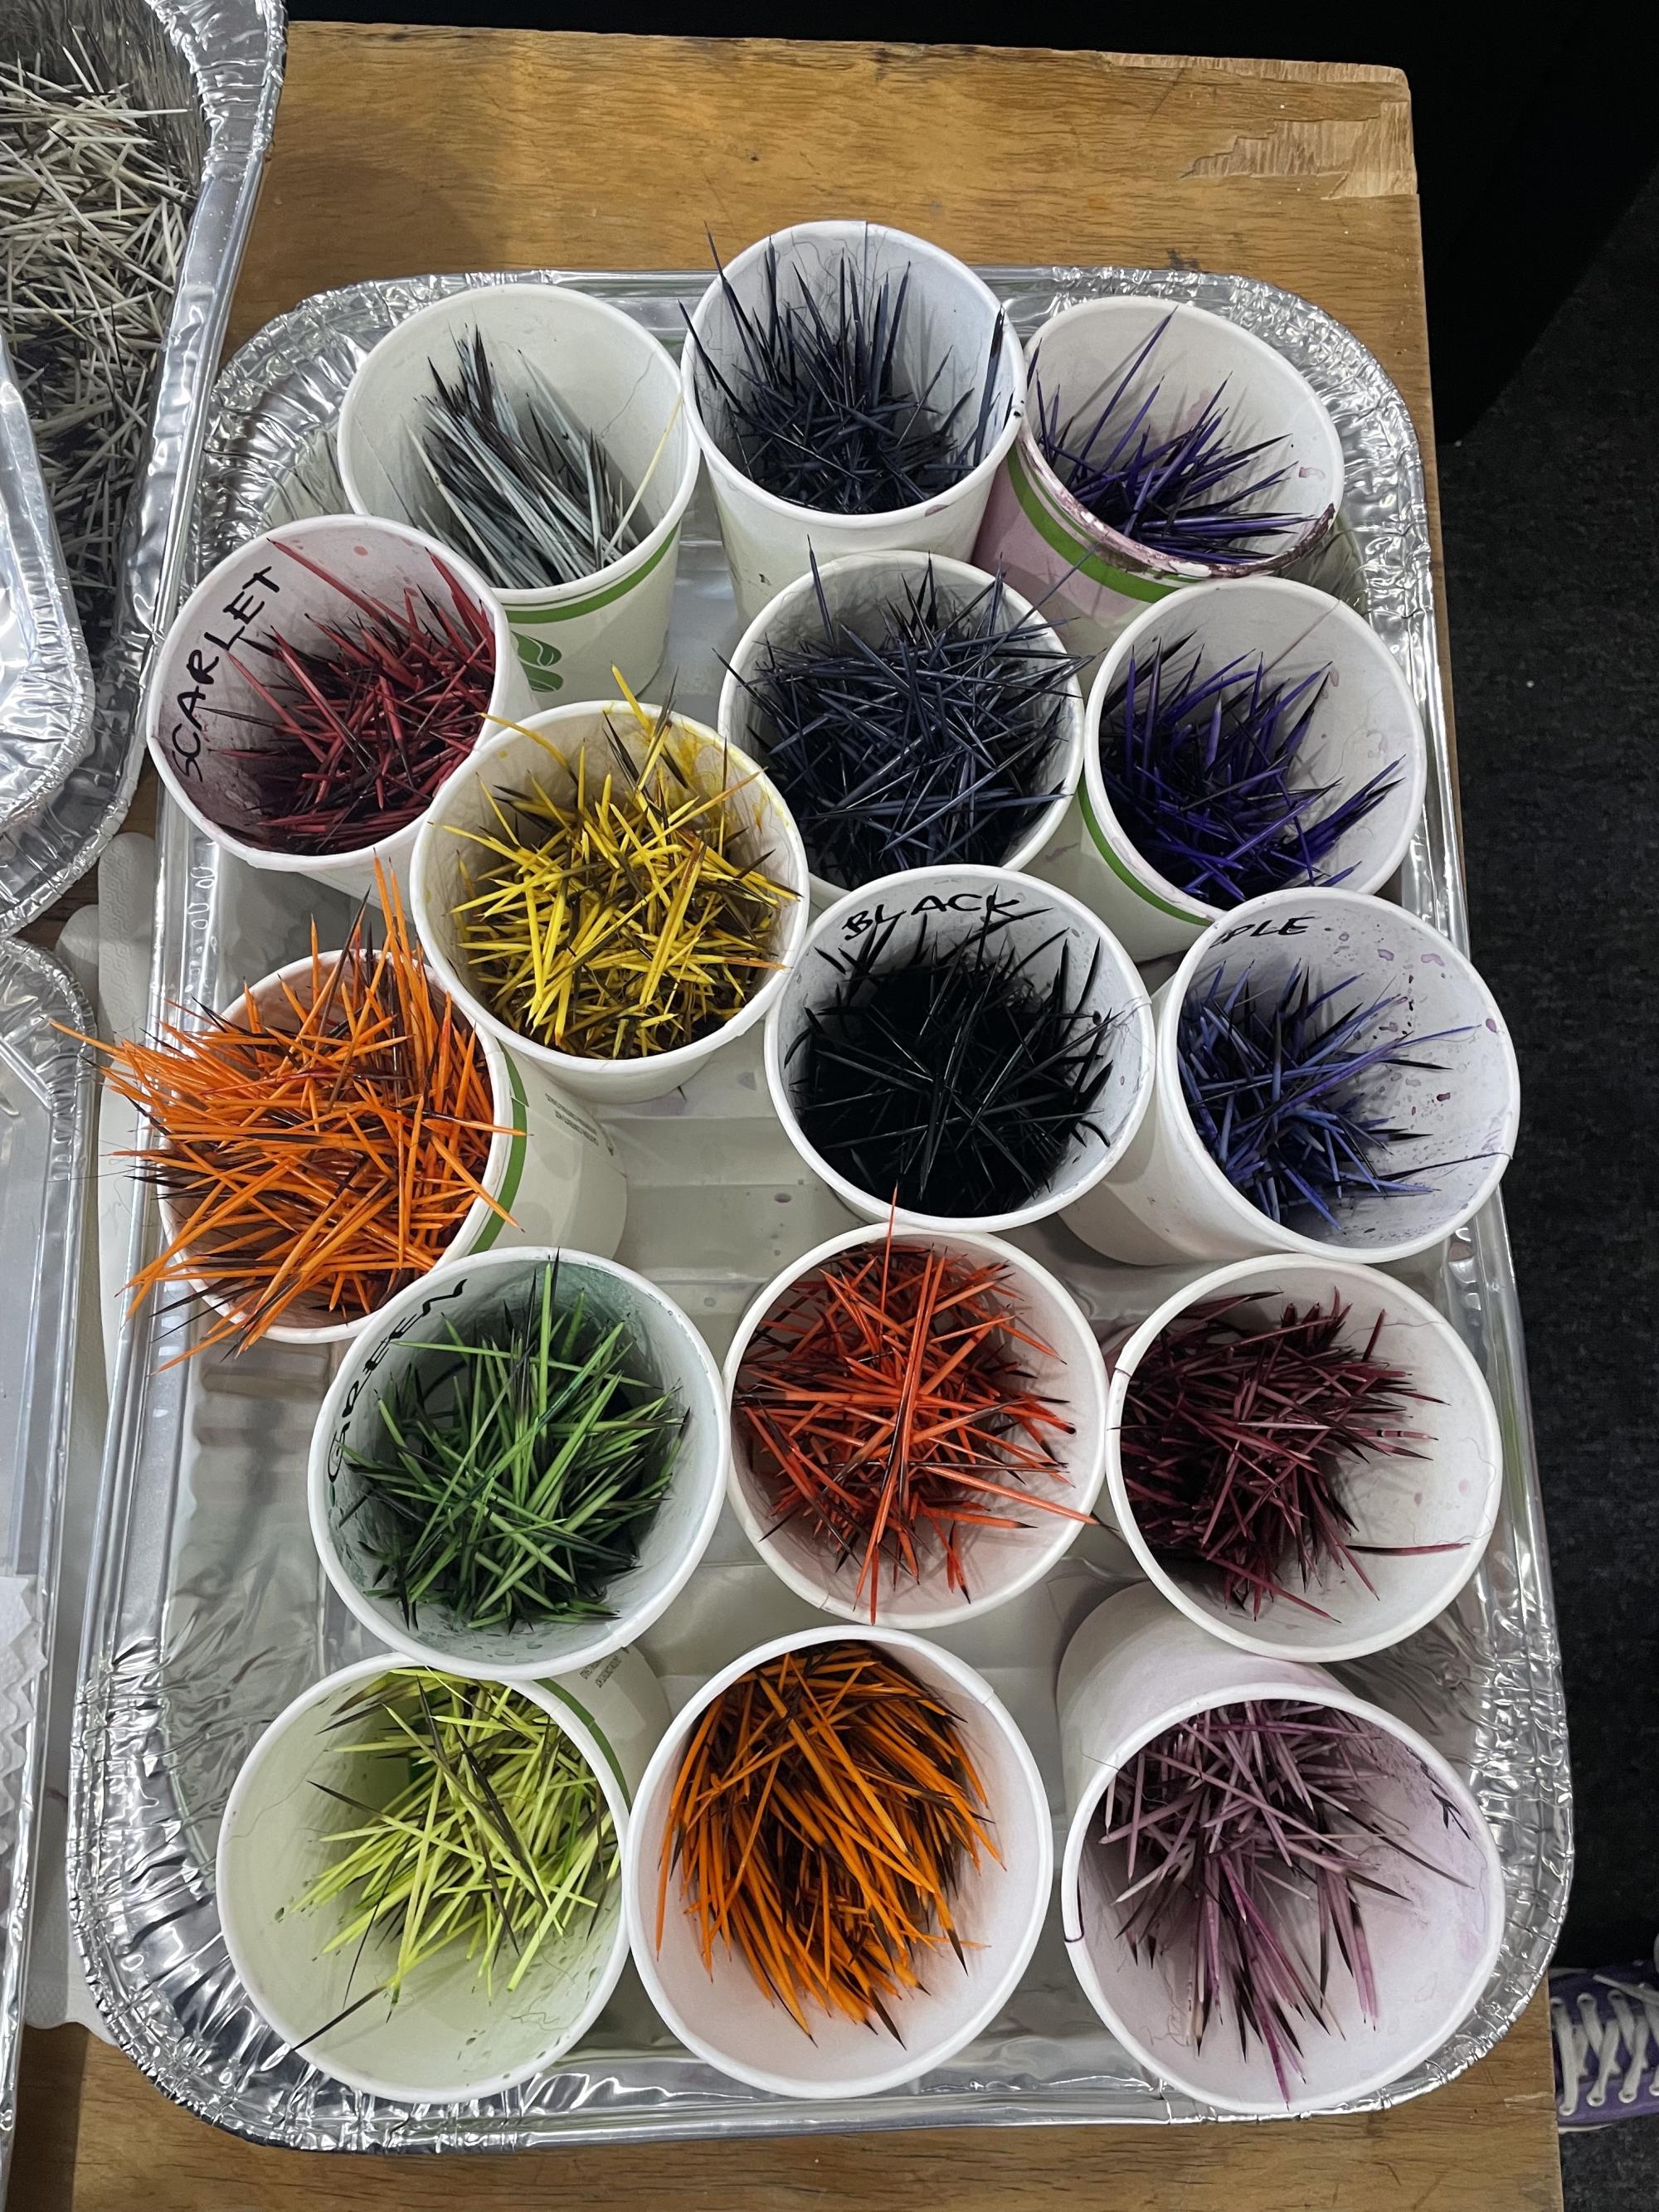 [ID: "16 paper cups full of dyed porcupine quills of various vibrant colours."]